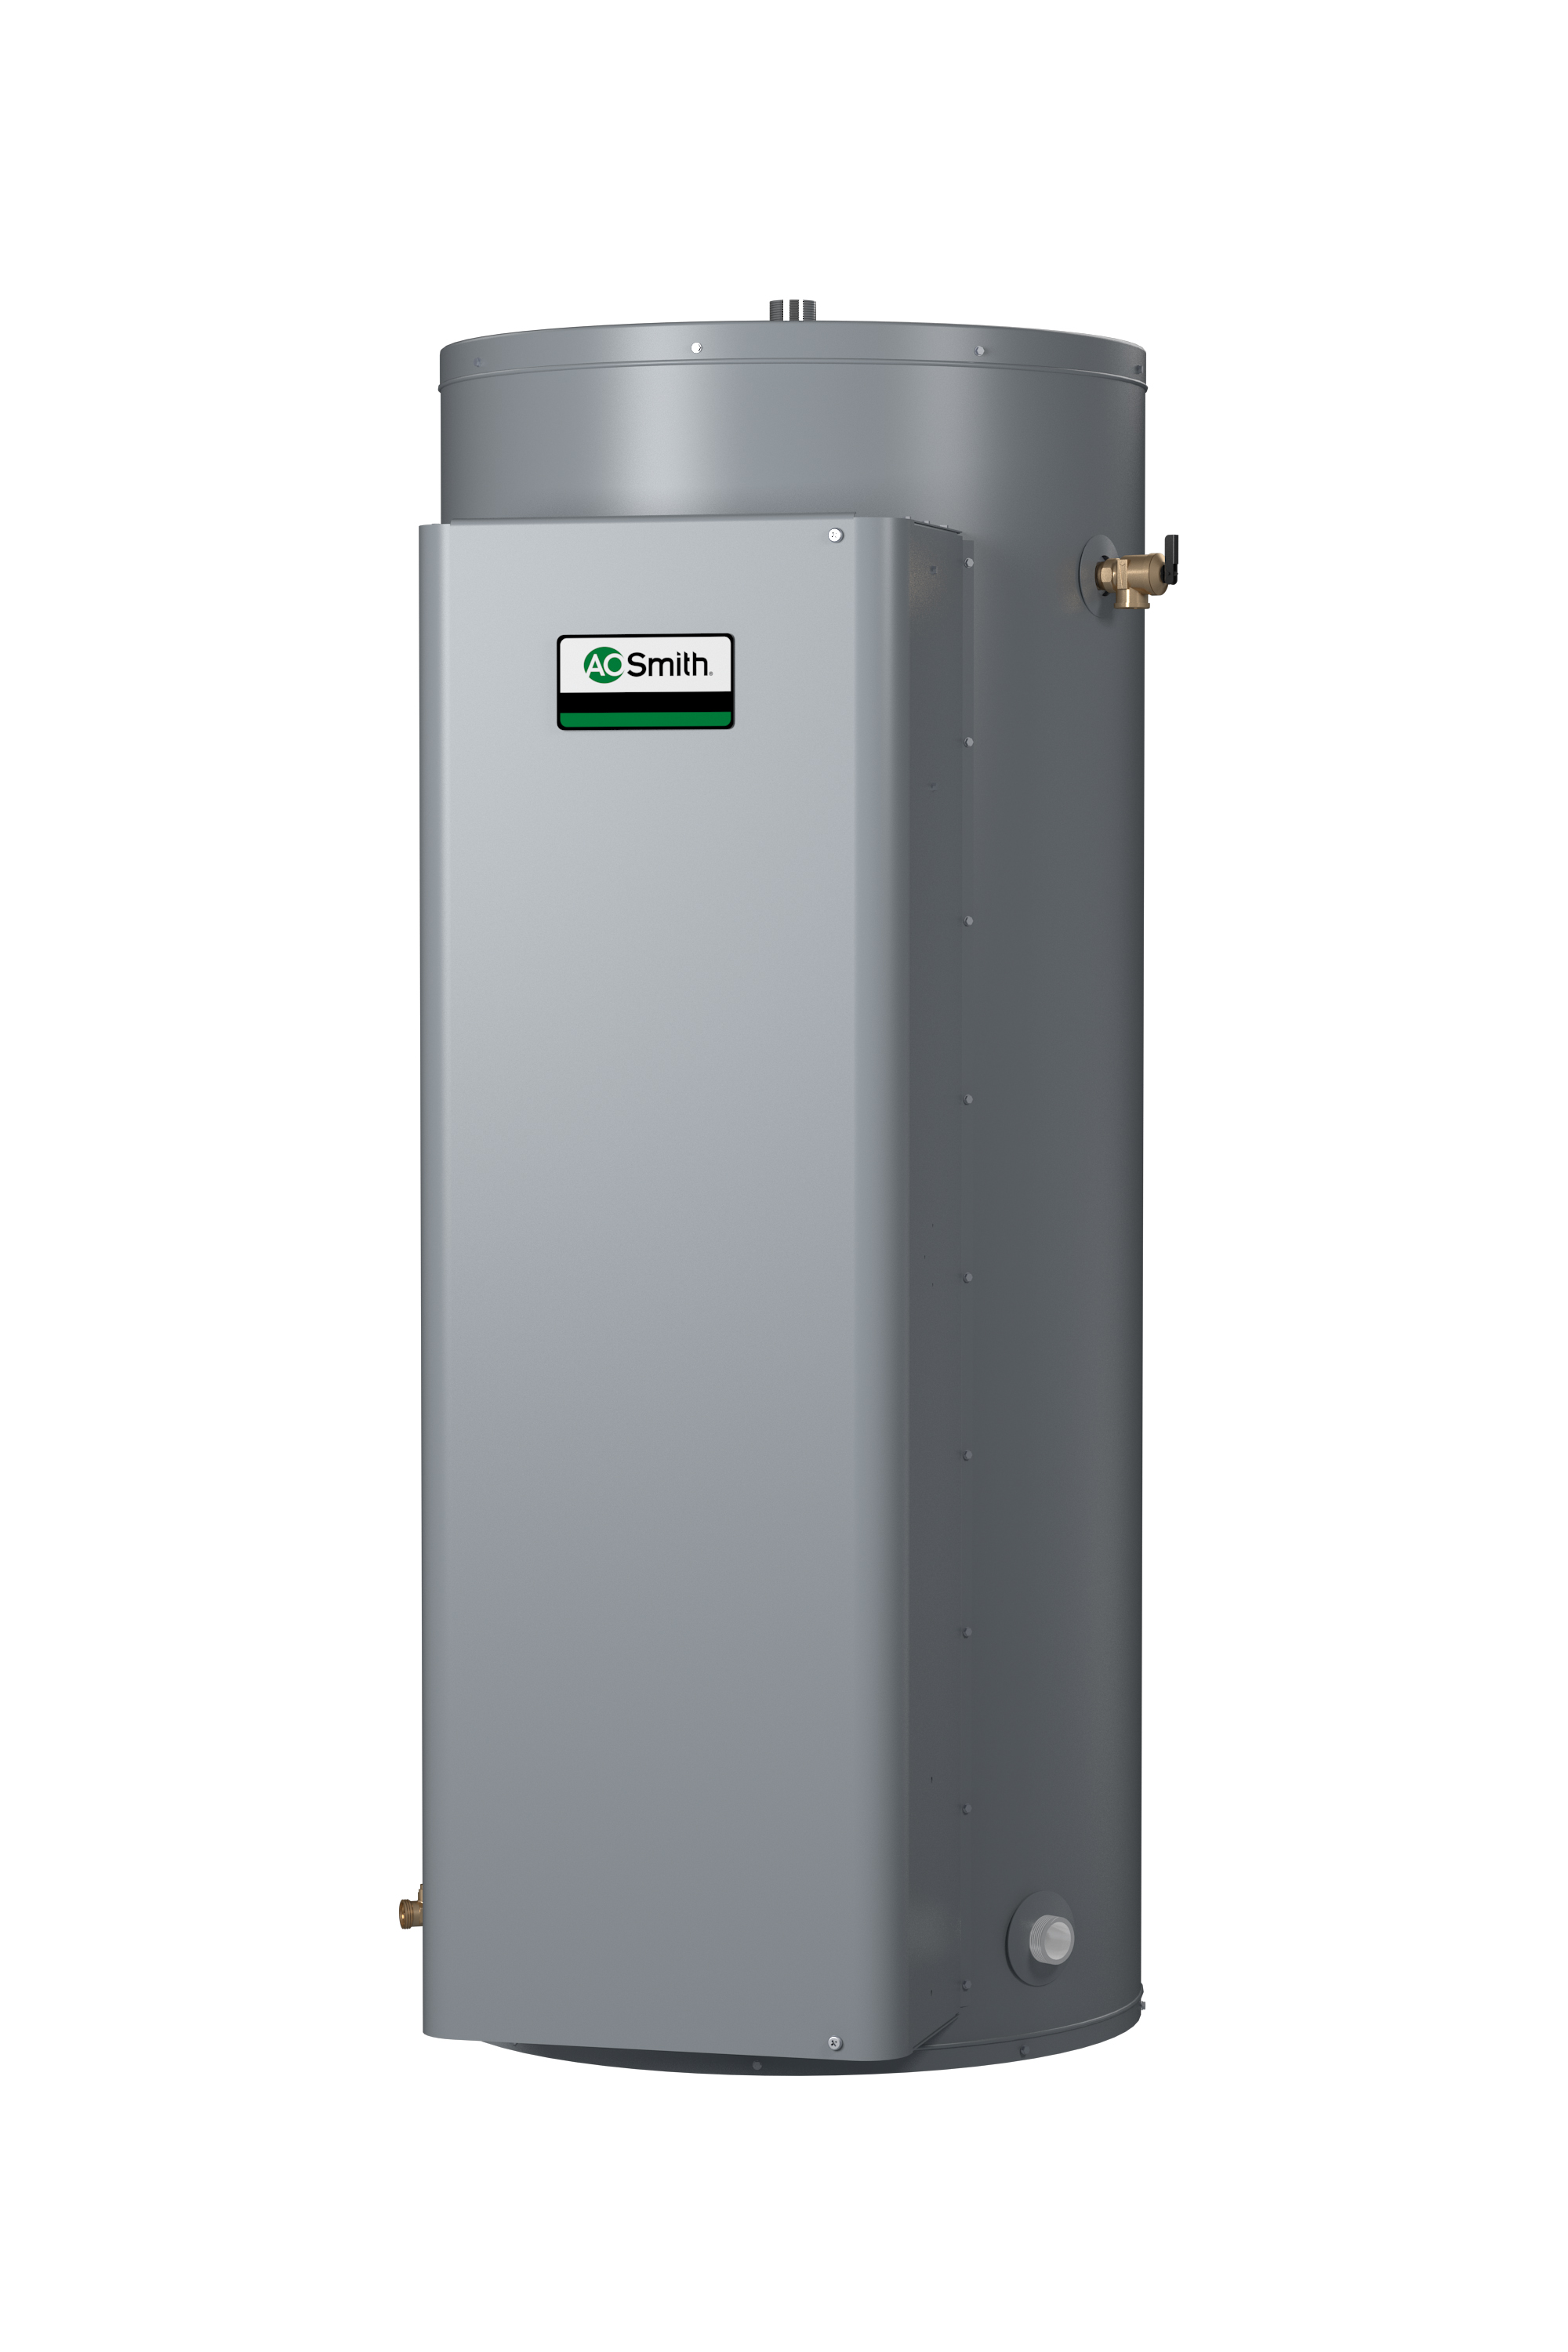 AO SMITH DRE-120-13.5, 119 GALLON, 13.5KW, 240 VOLT, 56.25 AMPS, 1 PHASE, 3 ELEMENT, COMMERCIAL ELECTRIC WATER HEATER, GOLD SERIES